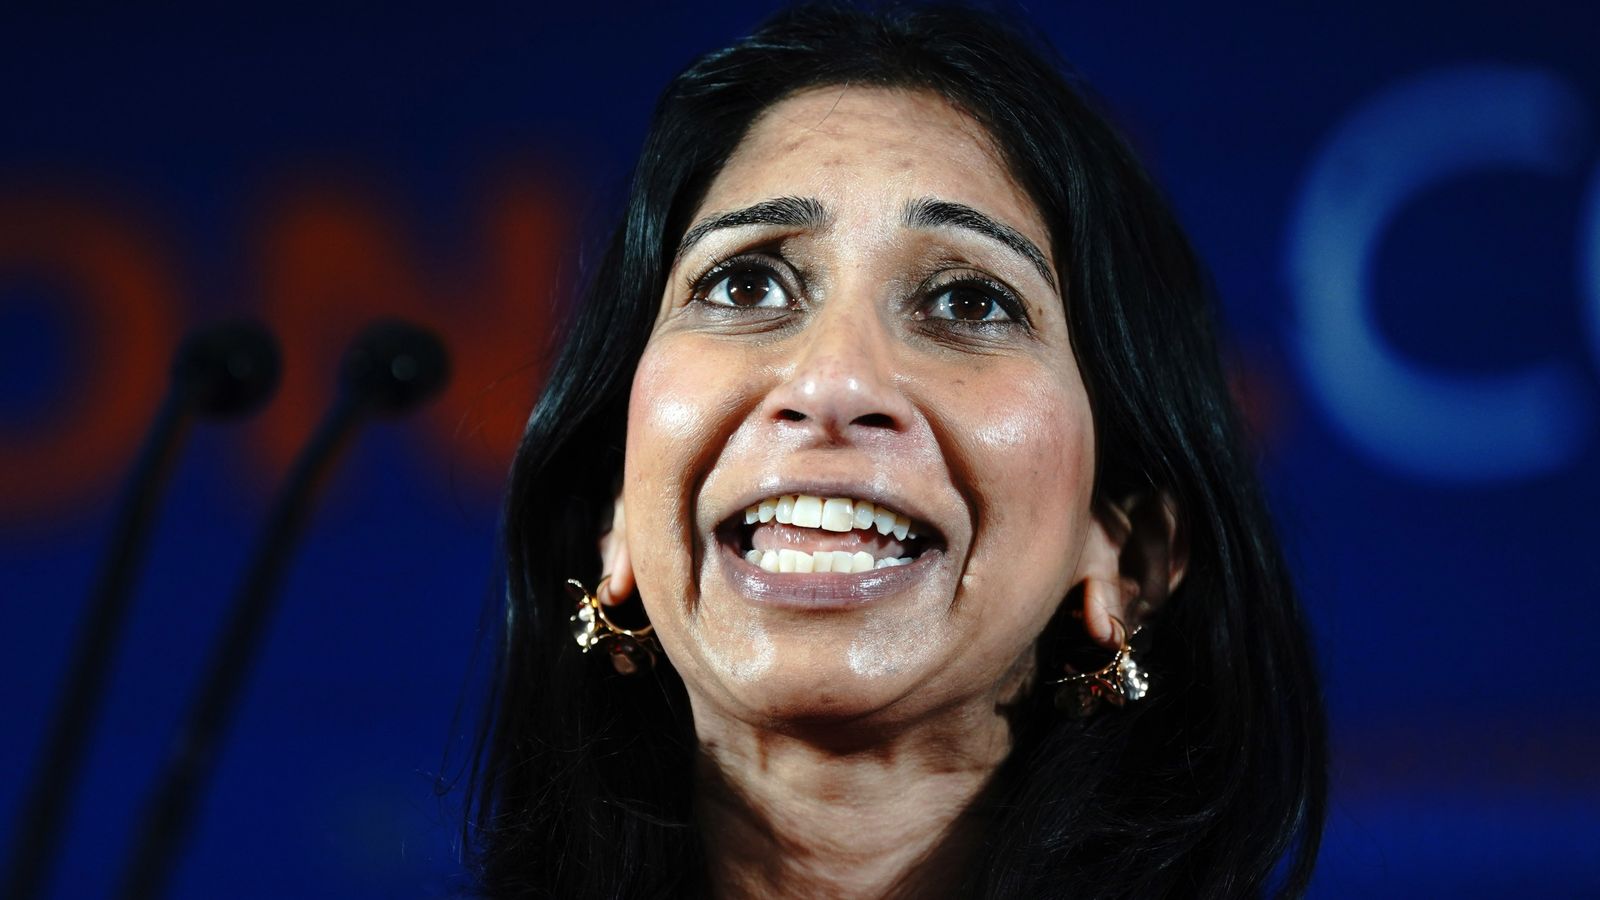 Suella Braverman hints at leadership ambitions with unusually personal pitch to Tory right